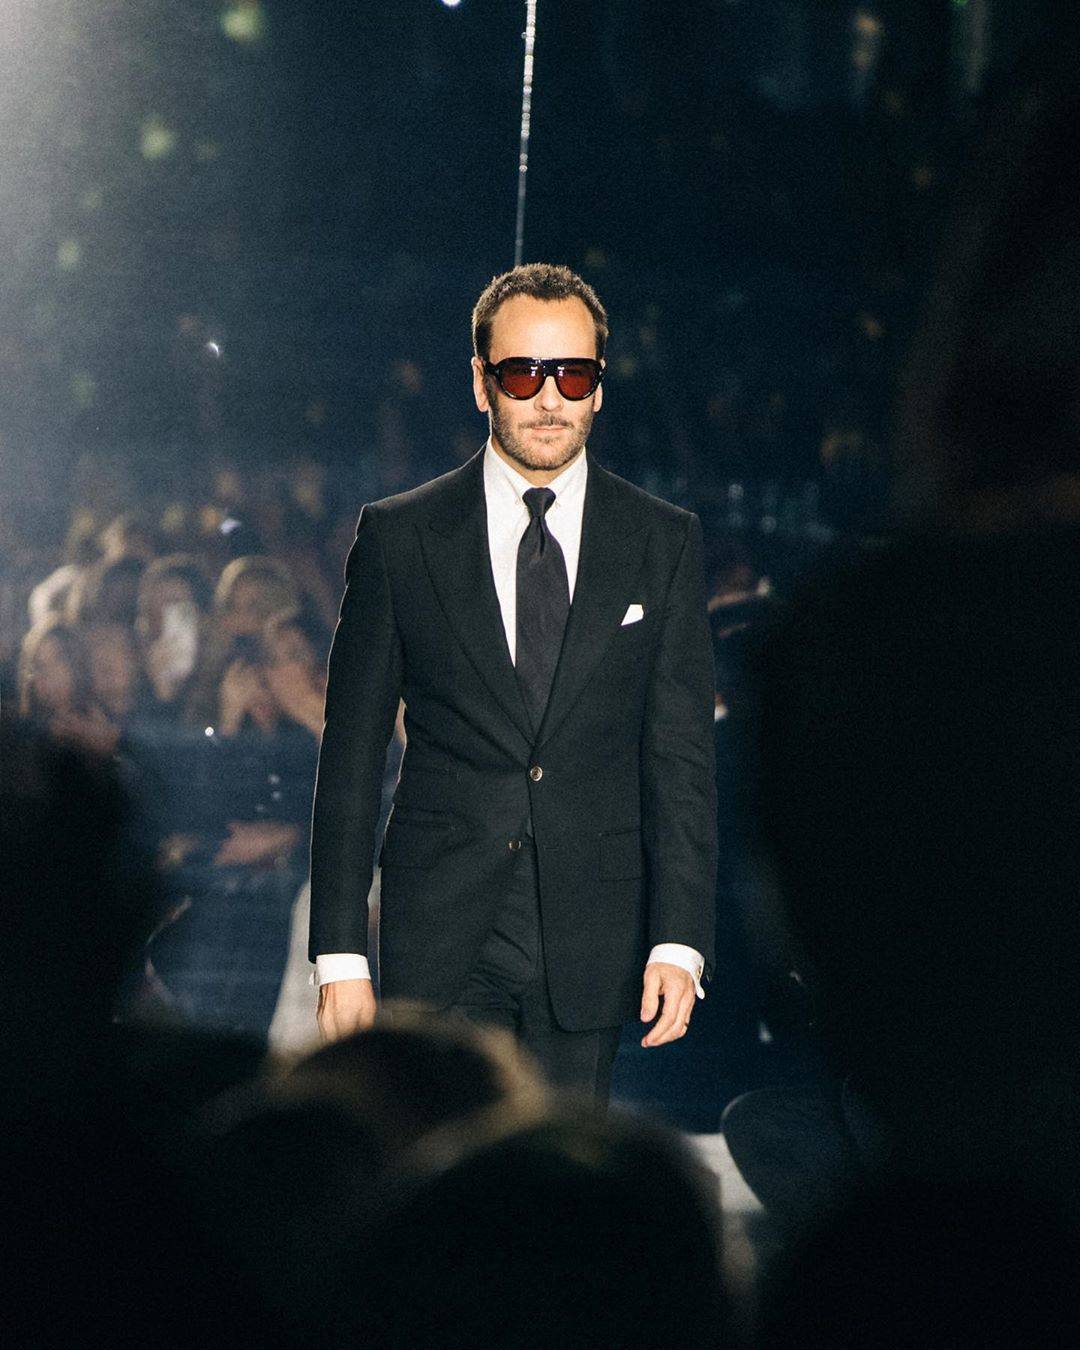 Thomas Carlyle Ford, the man behind Tom Ford's success and Gucci in ...